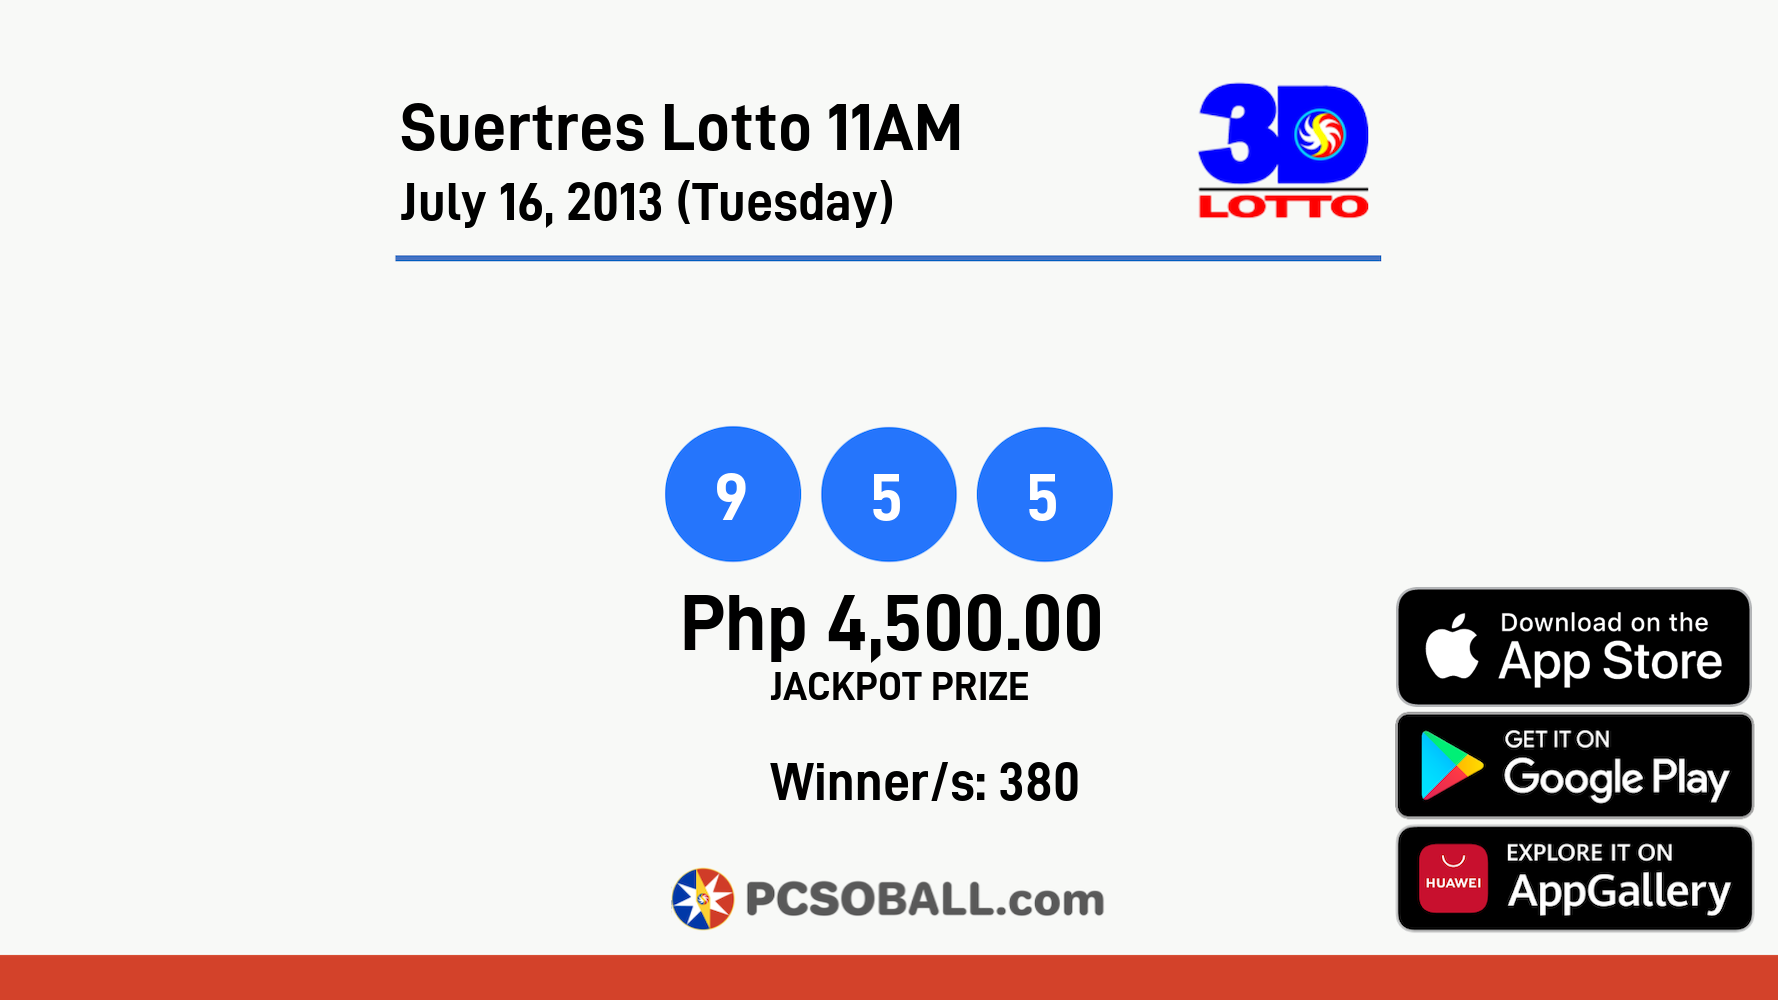 Suertres Lotto 11AM July 16, 2013 (Tuesday) Result